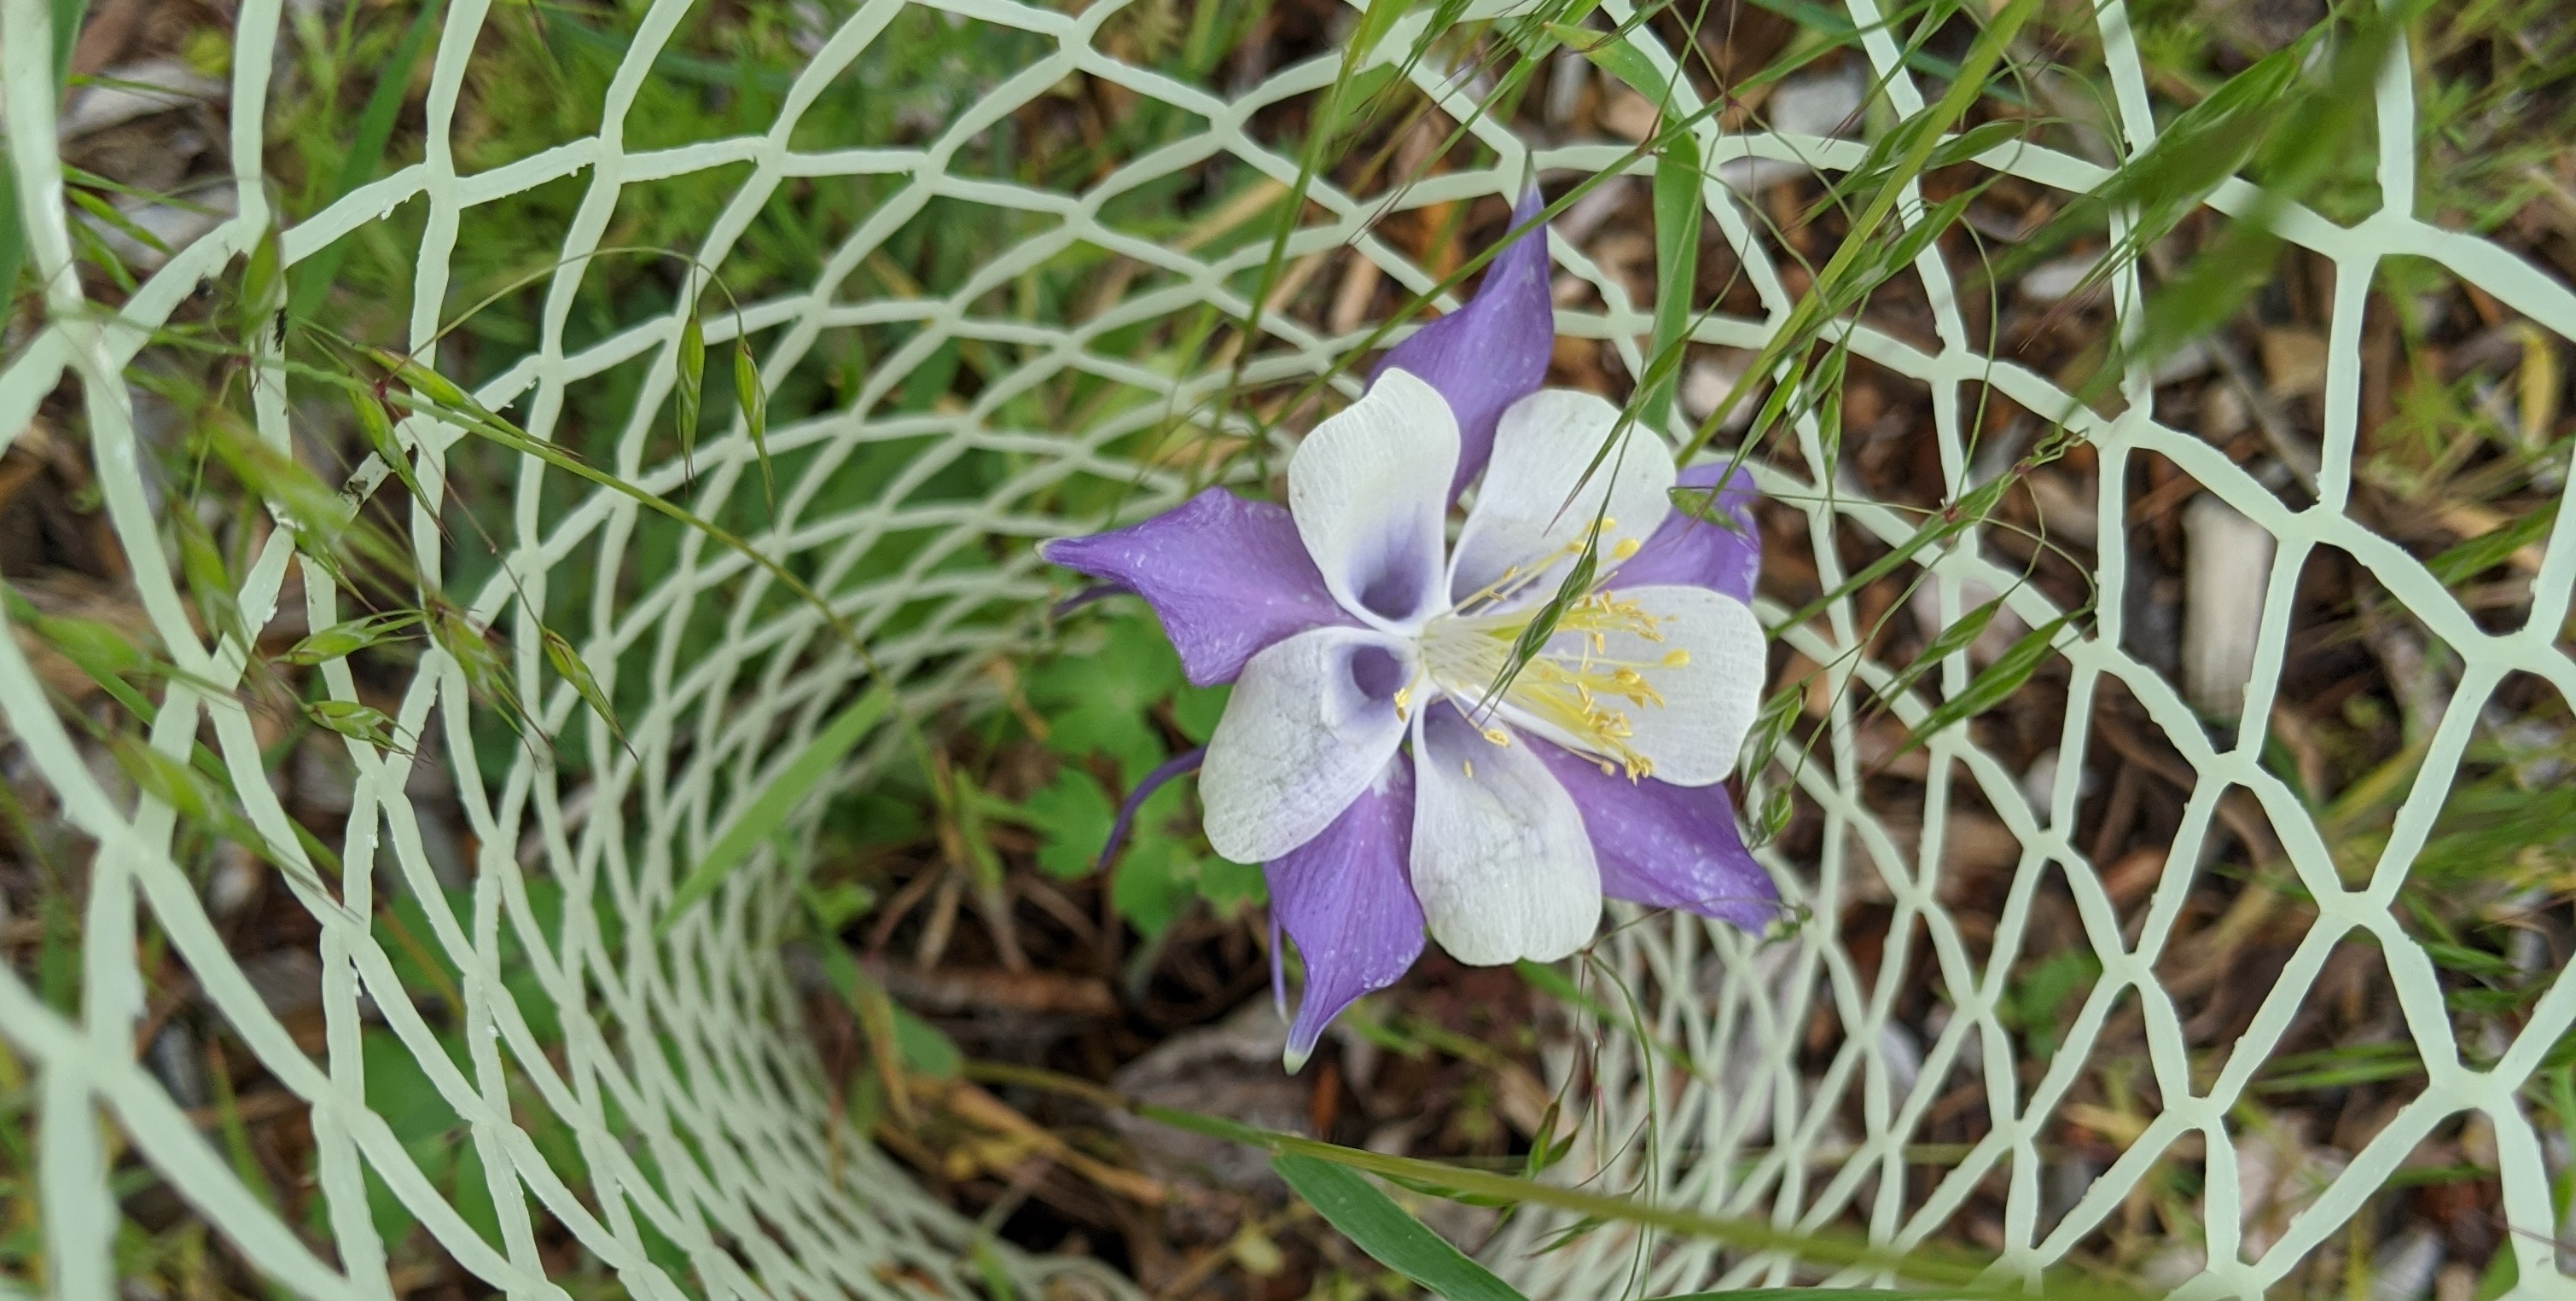 a purple and white columbine flower blooms, surrounded by a protective mesh seedling cage